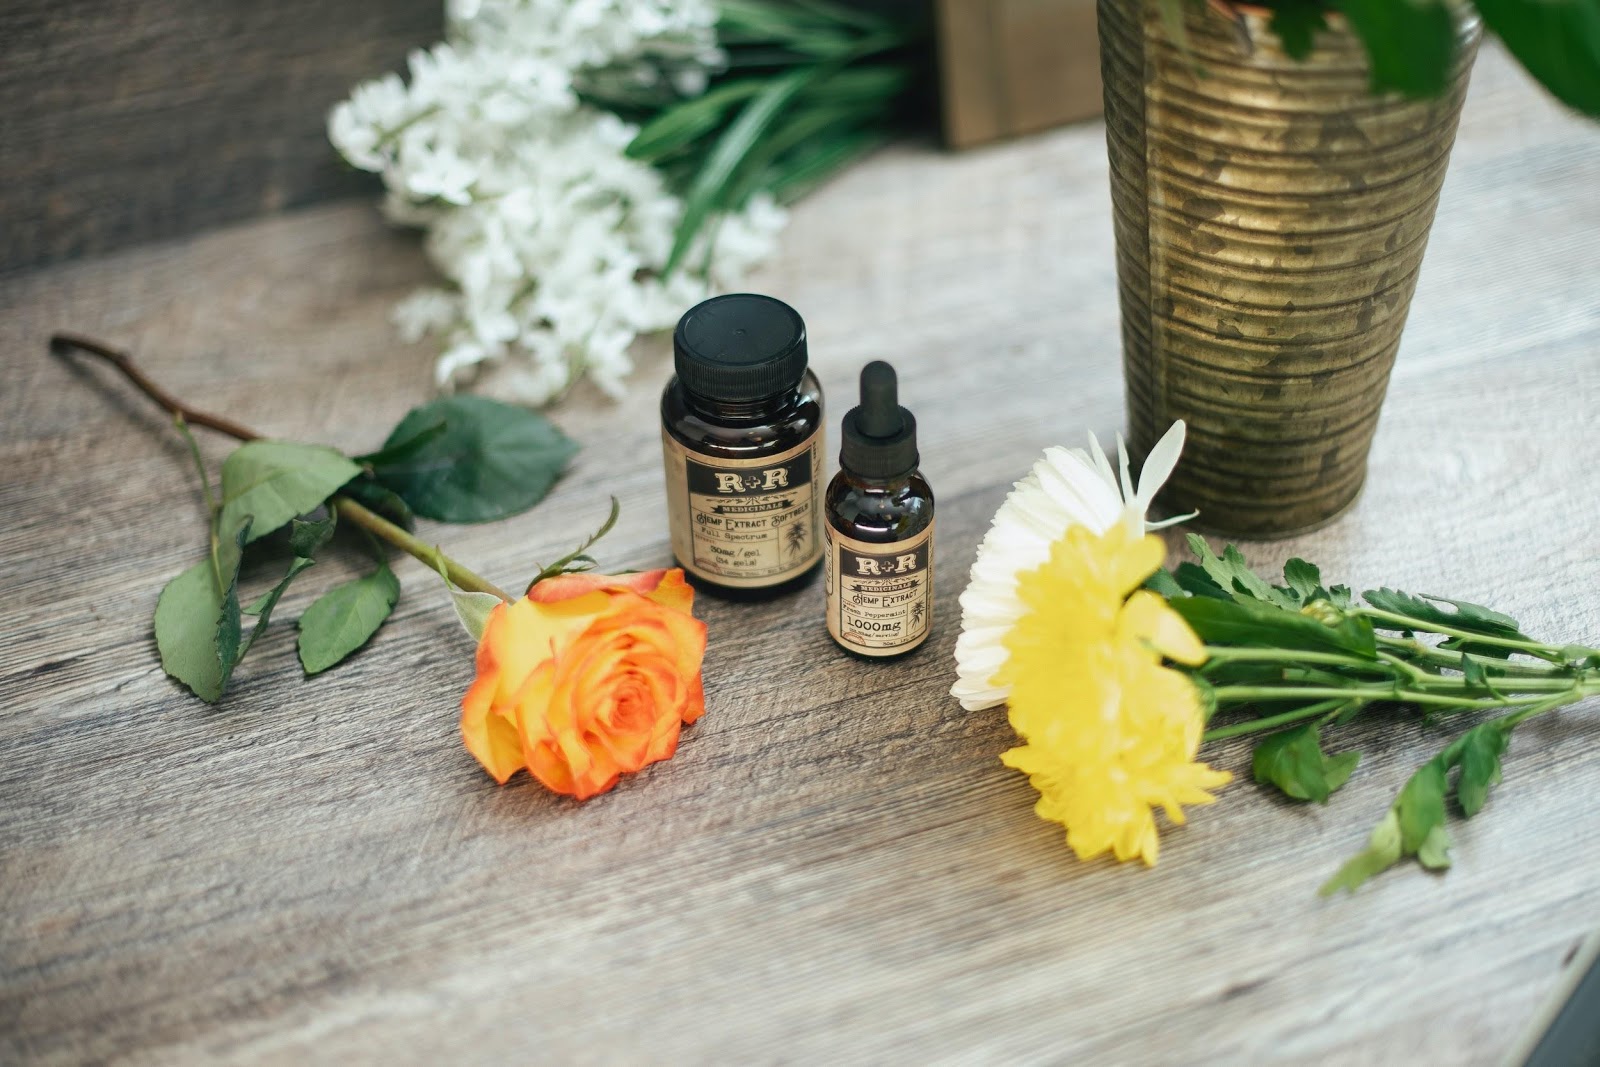 Can CBD Oil Help Your Beauty Routine?